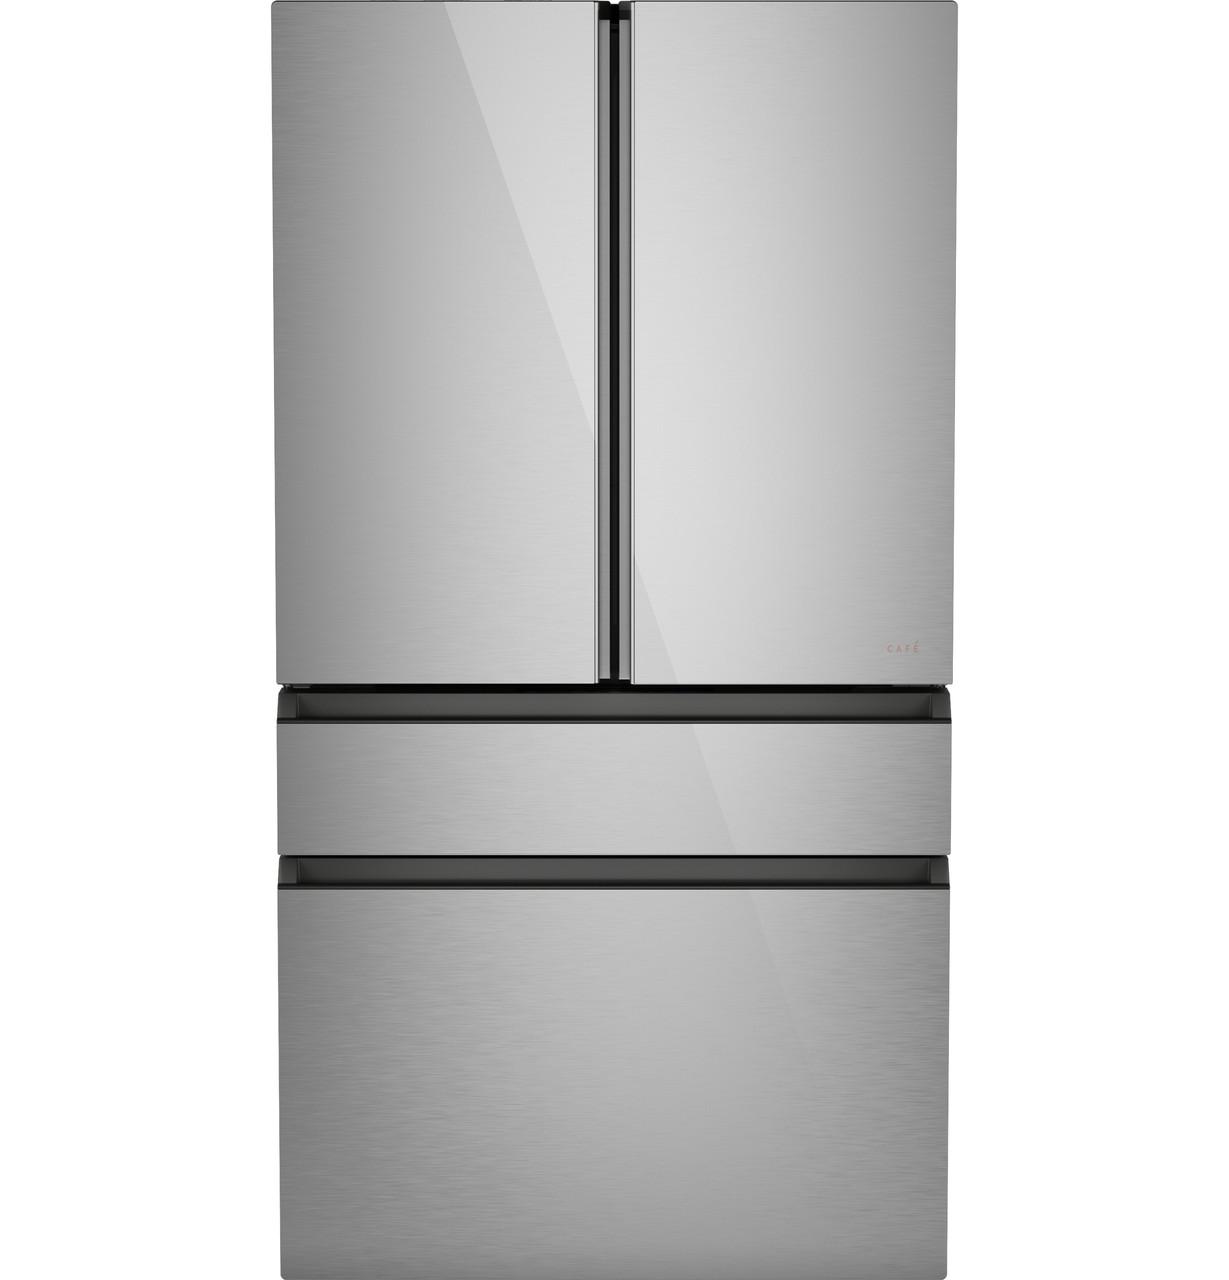 Cafe Caf(eback)™ ENERGY STAR® 28.7 Cu. Ft. Smart 4-Door French-Door Refrigerator in Platinum Glass With Dual-Dispense AutoFill Pitcher